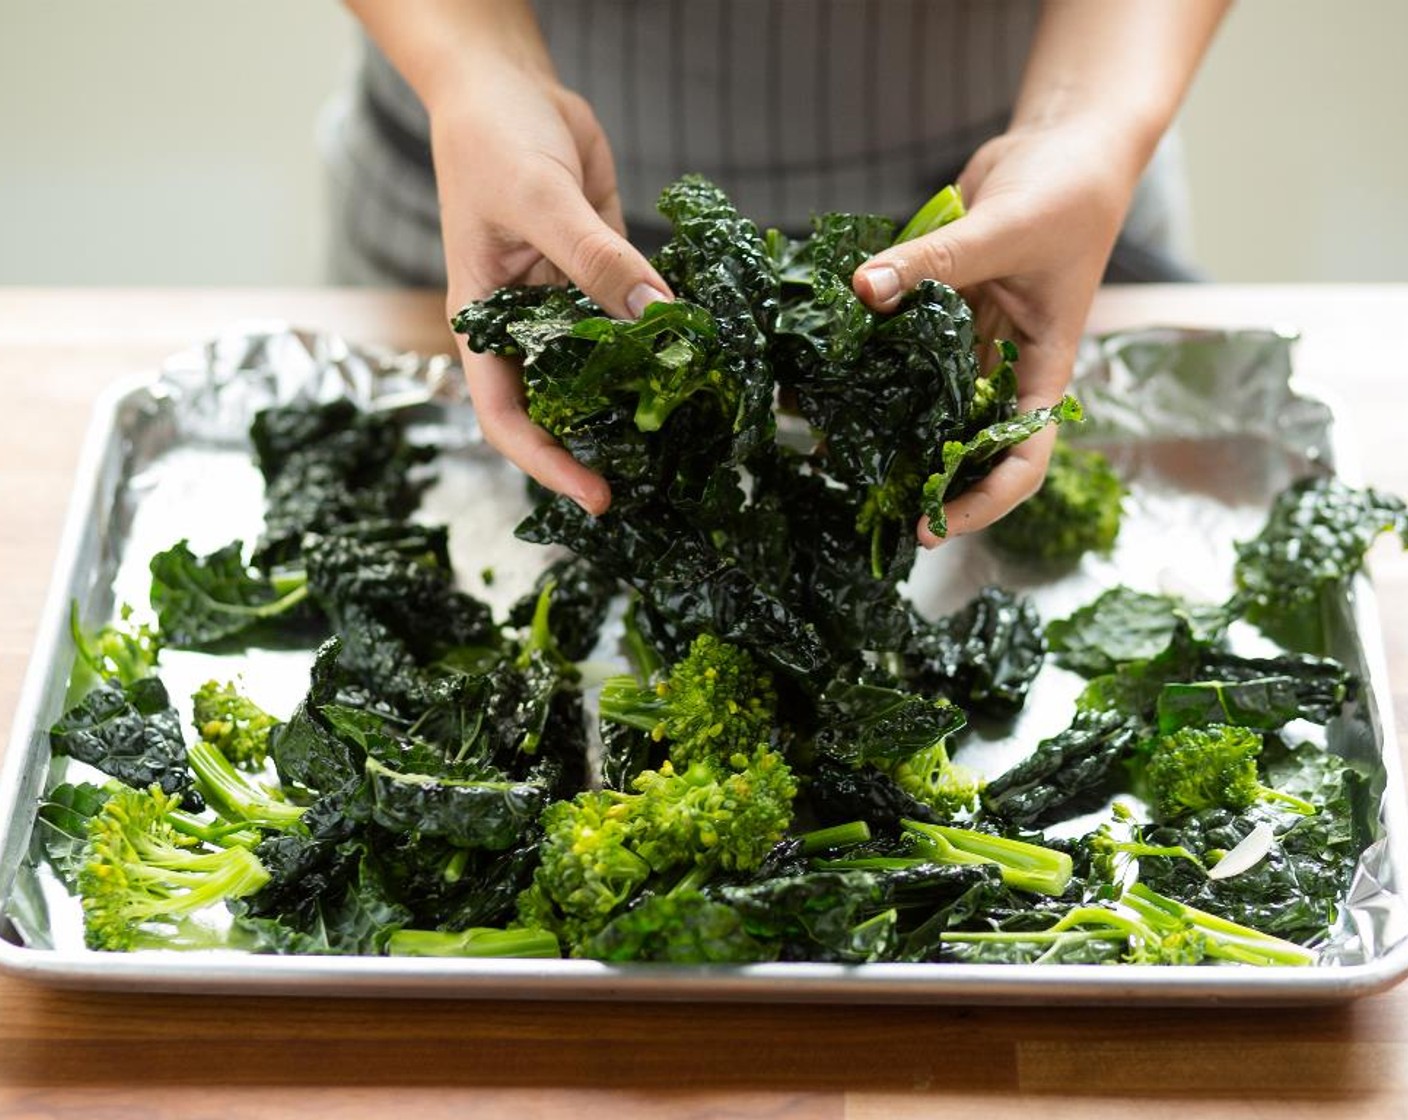 step 7 Place the kale, broccolini and garlic on a sheet pan lined with foil. Drizzle with Olive Oil (1 Tbsp) and season with Salt (1/4 tsp) and Ground Black Pepper (1/4 tsp). Toss to thoroughly combine.